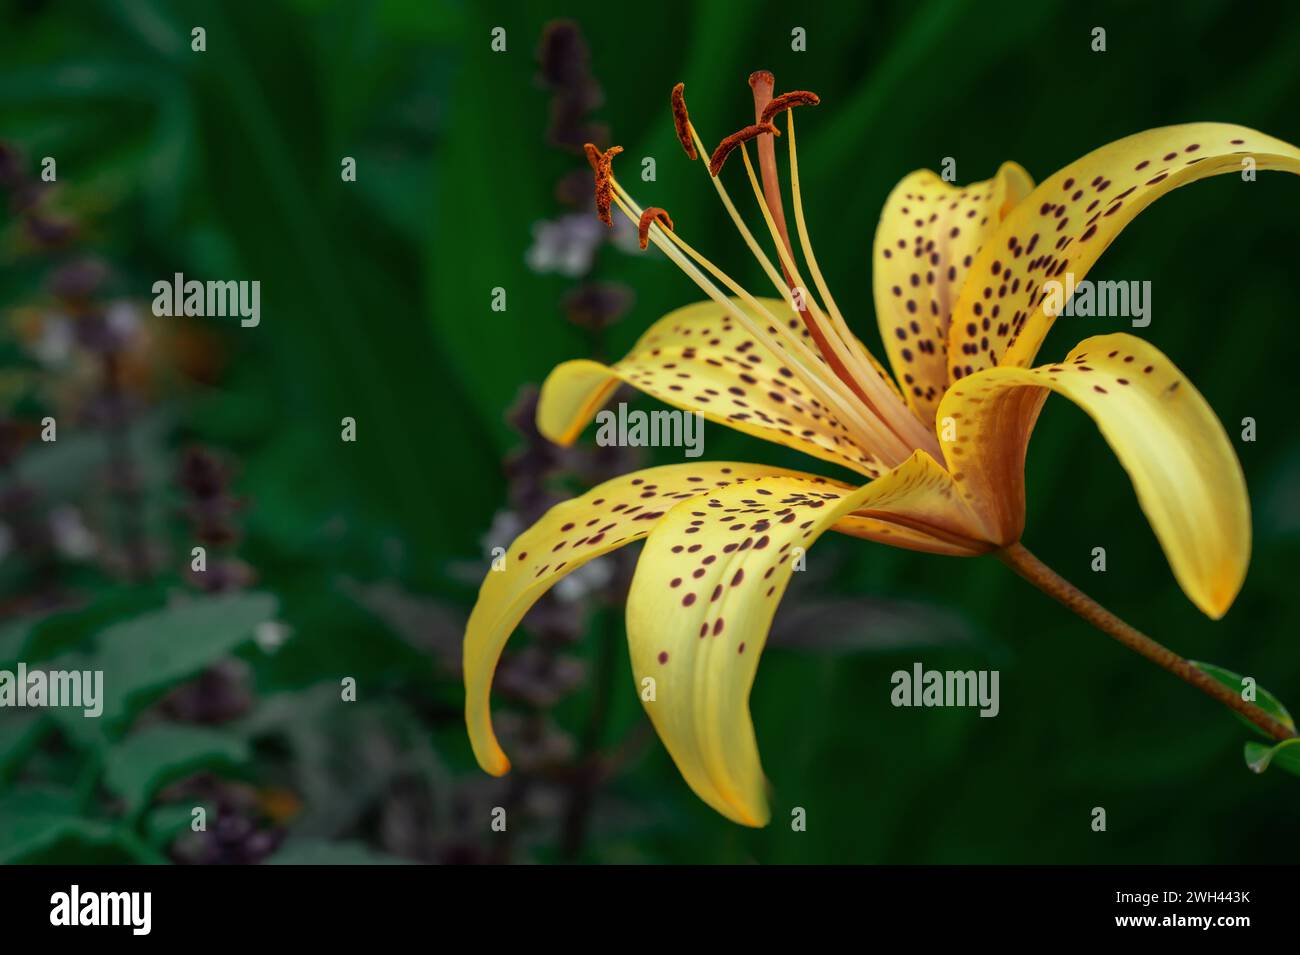 Yellow tiger lily in bloom in garden. Tiger lilies in garden. Lilium lancifolium. Yellow lily flower. Copy space Stock Photo